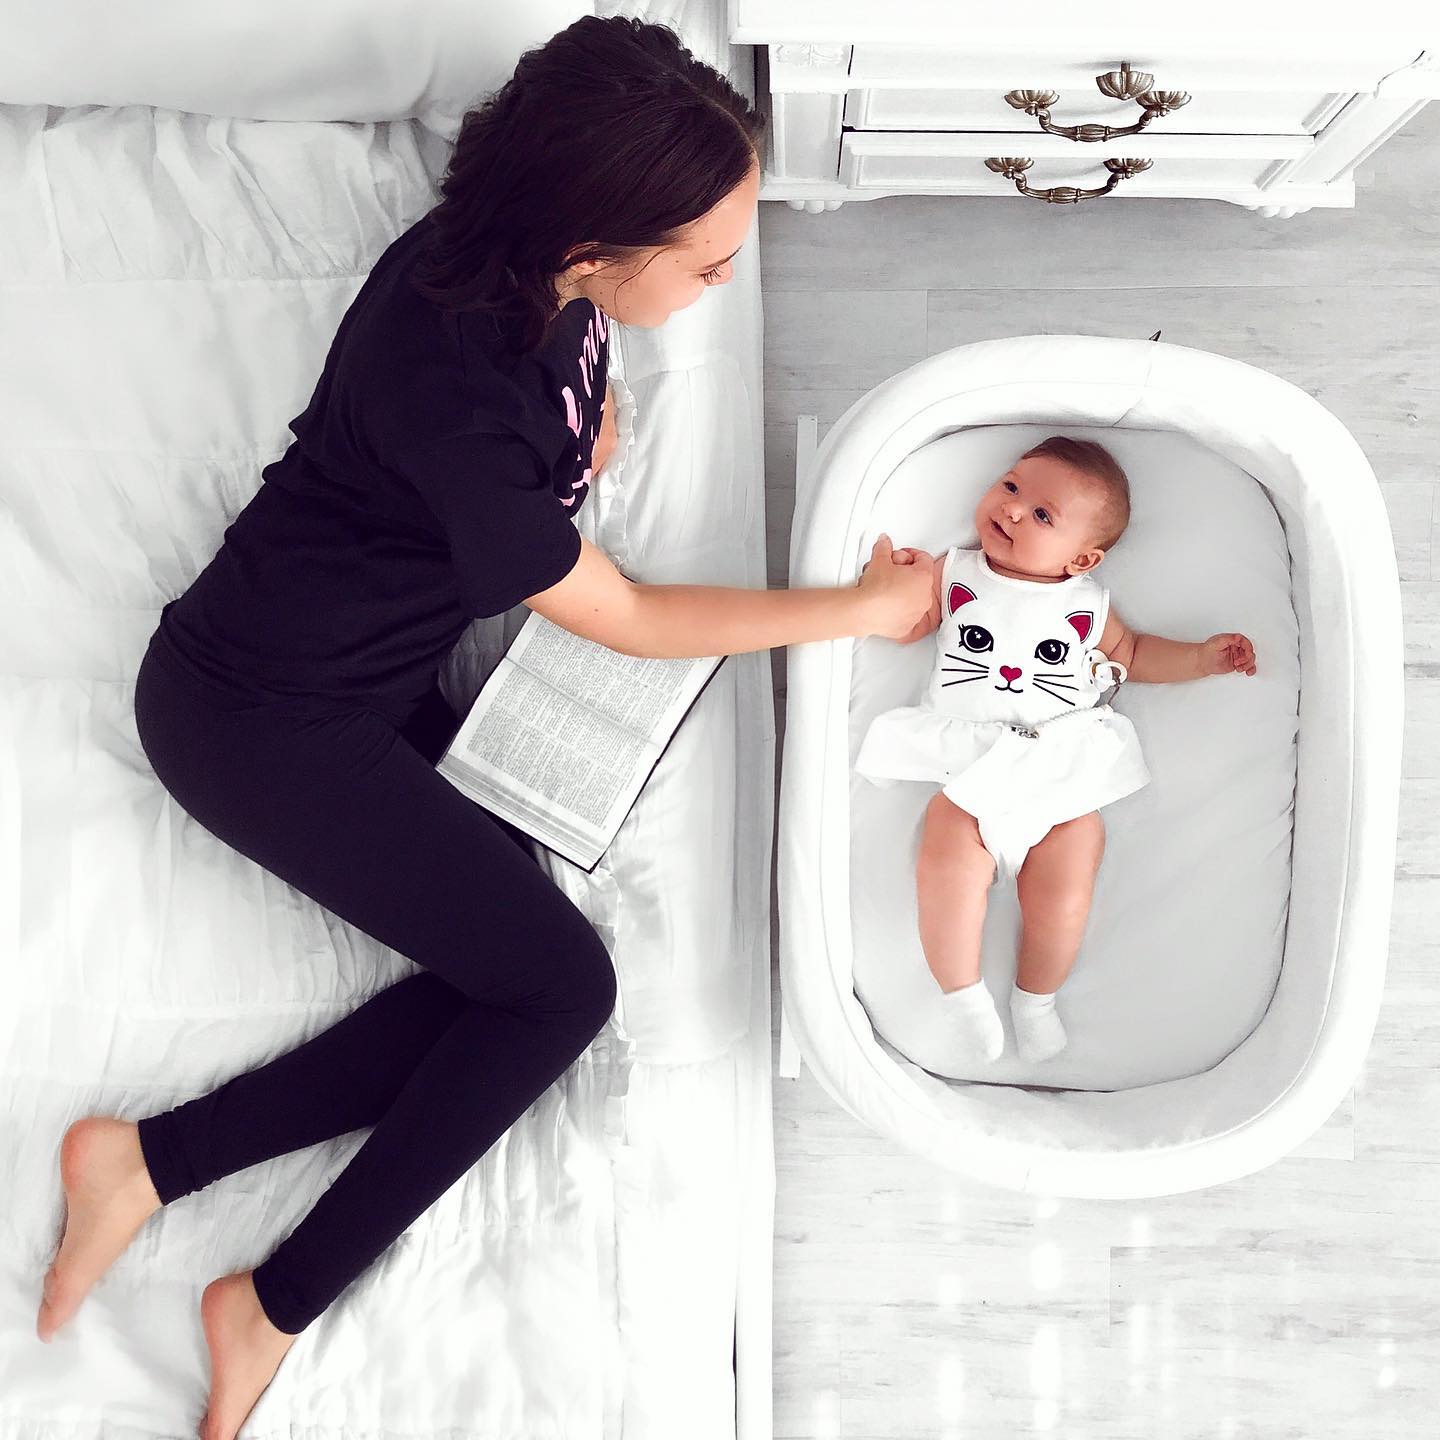 A mother bonding with a baby in a crib. Photo by Instagram user @vicolsfamily.